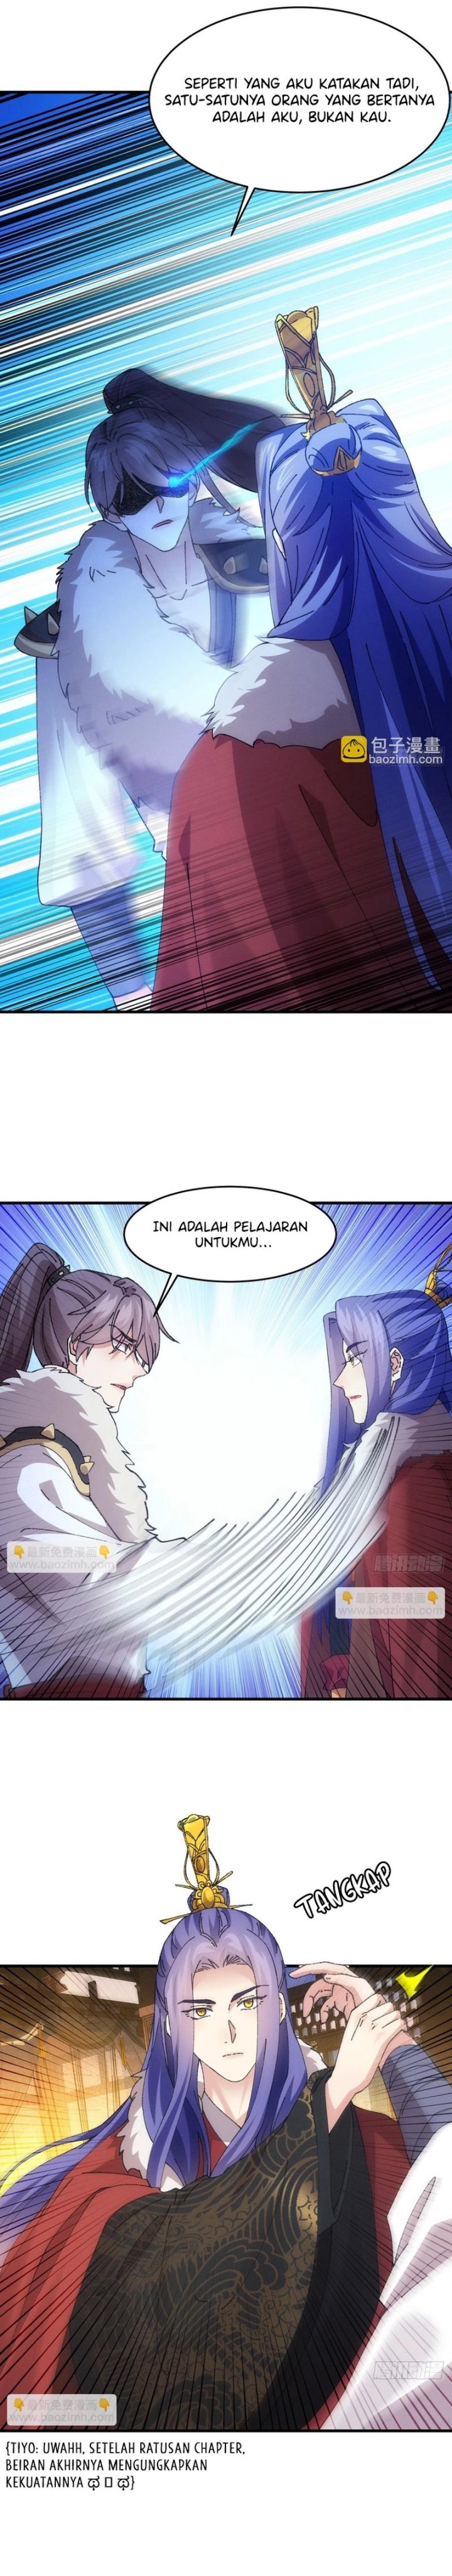 Dilarang COPAS - situs resmi www.mangacanblog.com - Komik i just dont play the card according to the routine 193 - chapter 193 194 Indonesia i just dont play the card according to the routine 193 - chapter 193 Terbaru 5|Baca Manga Komik Indonesia|Mangacan